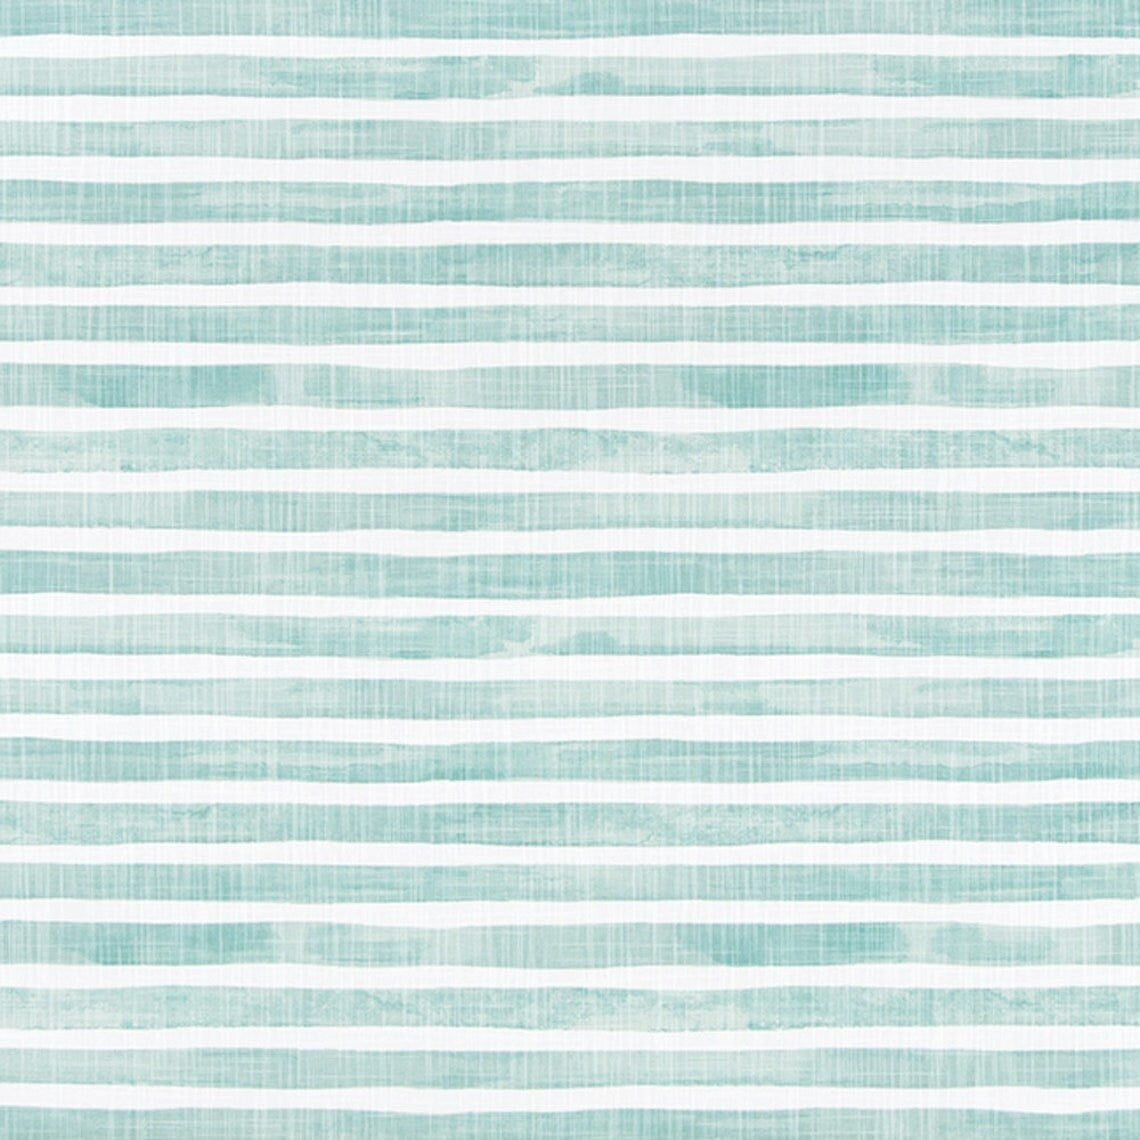 pinch pleated curtains in nelson cancun blue horizontal watercolor stripe